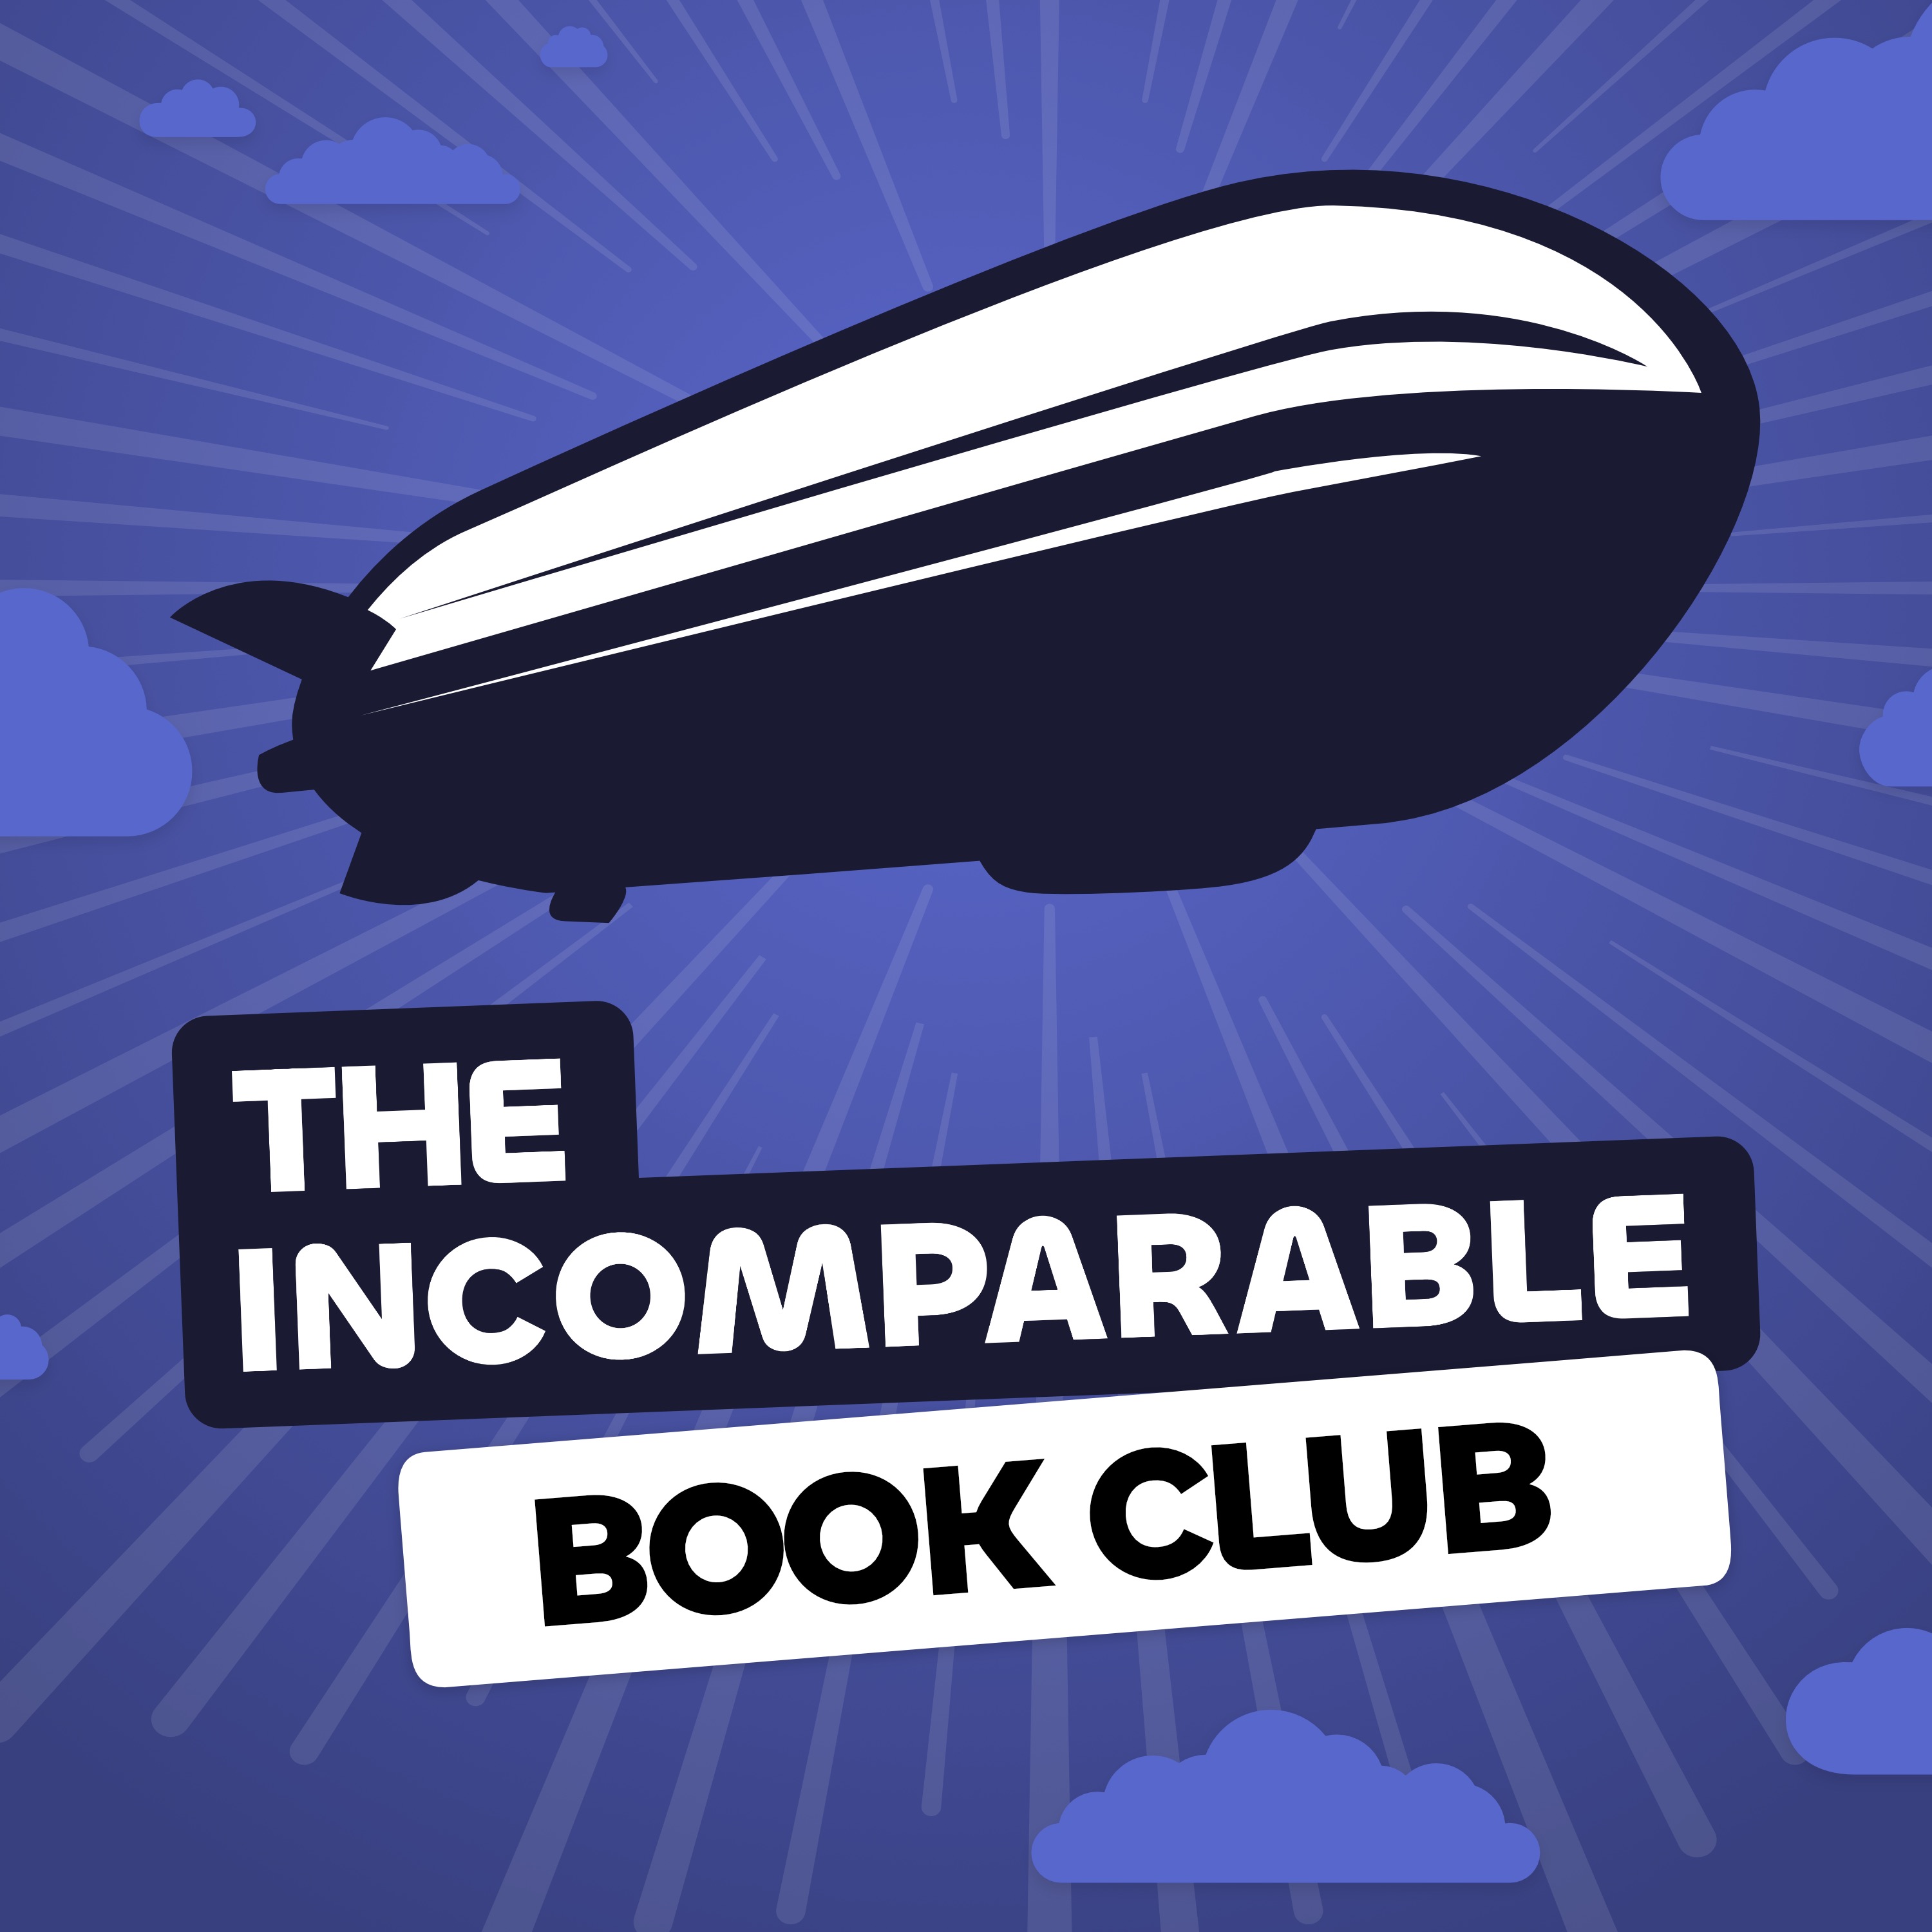 Book Club - a subcategory of The Incomparable Mothership